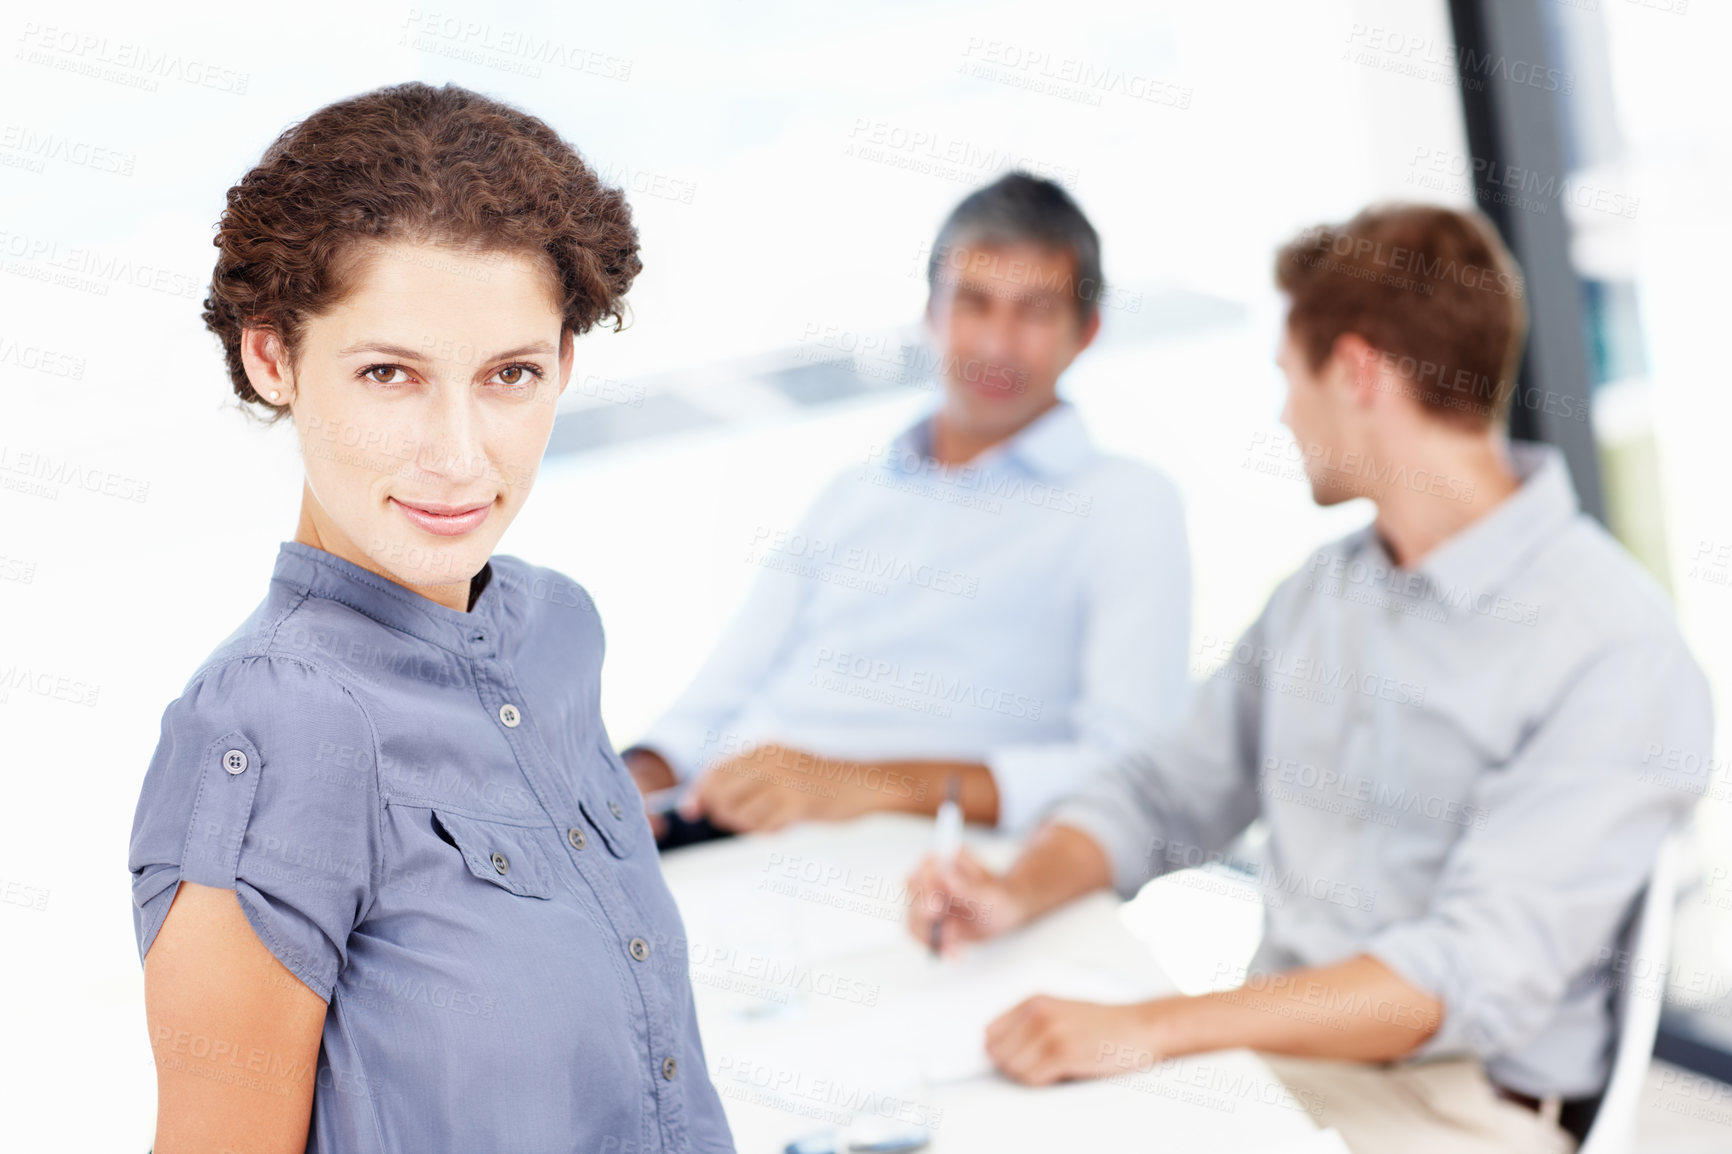 Buy stock photo Portrait of an attractive office worker with her coworkers seated behind her